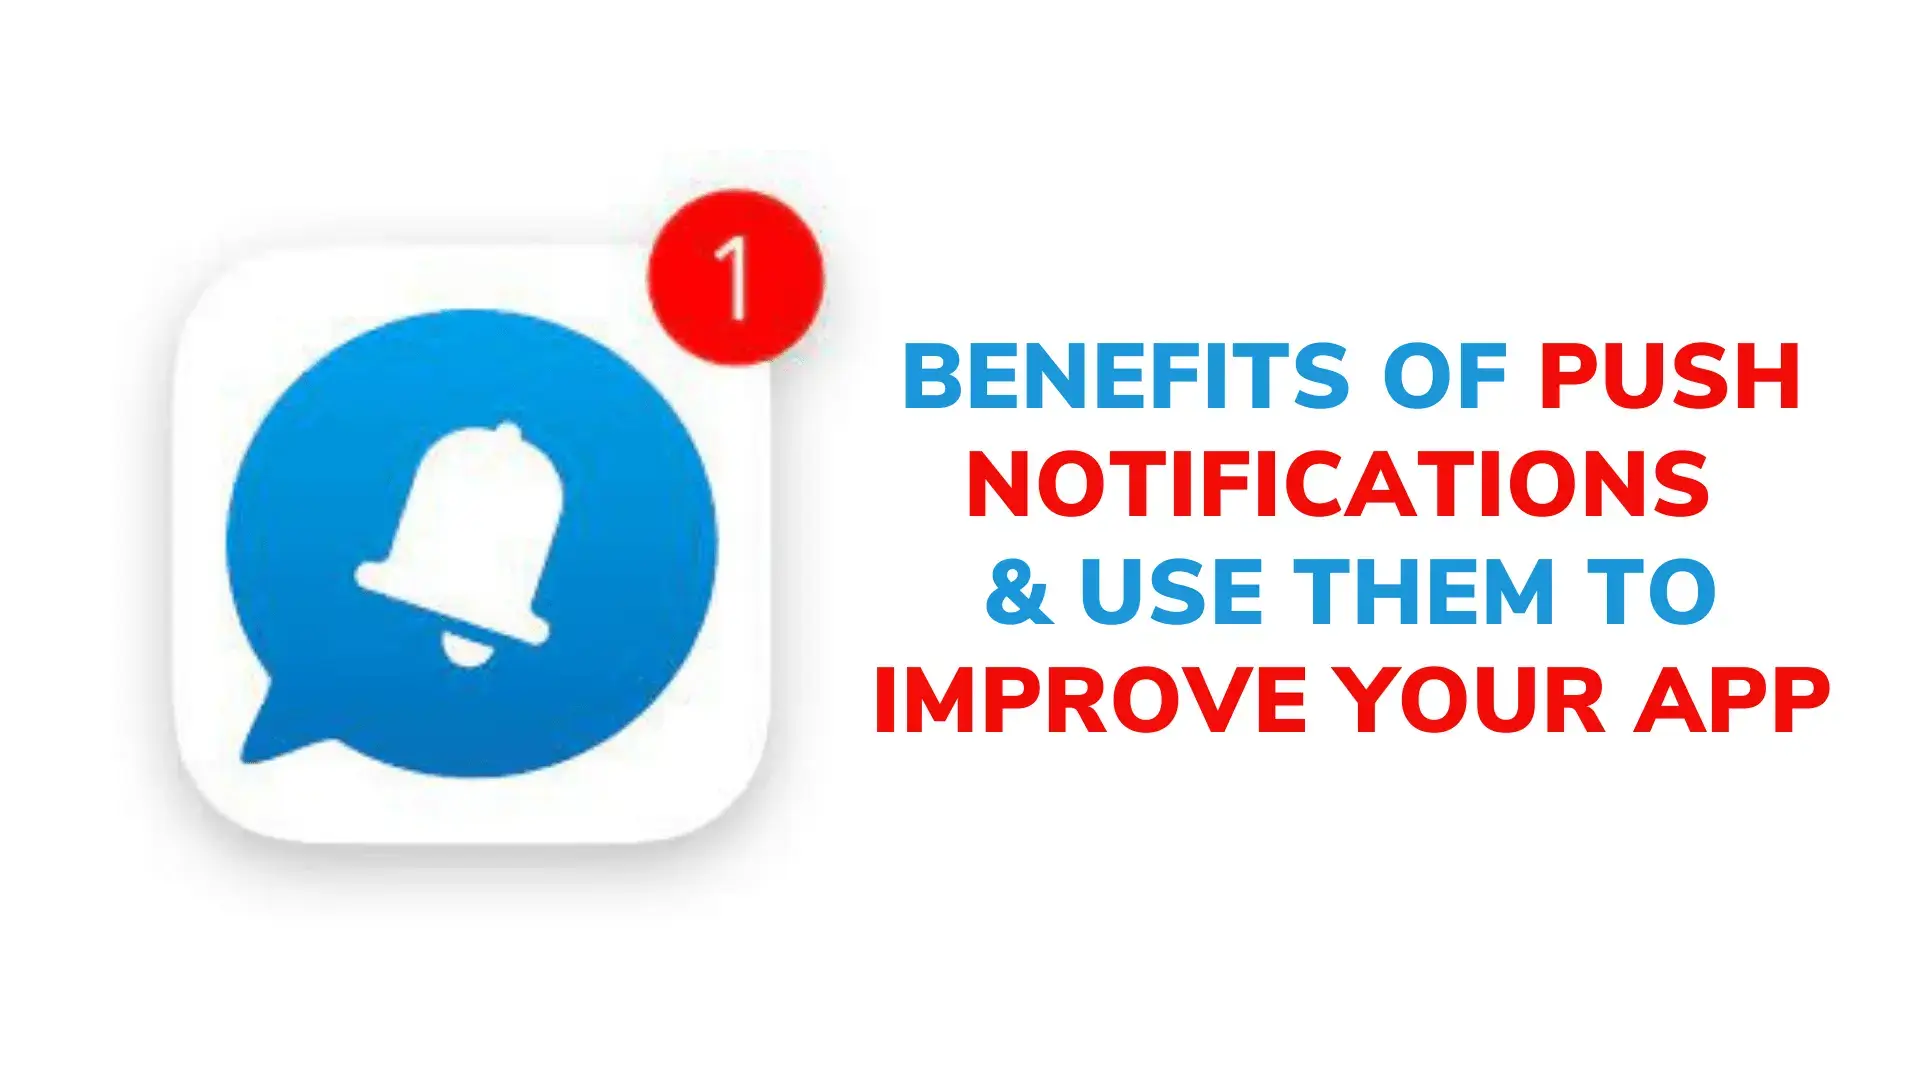 Benefits-of-Push-Notifications-Use-Them-to-Improve-Your-App